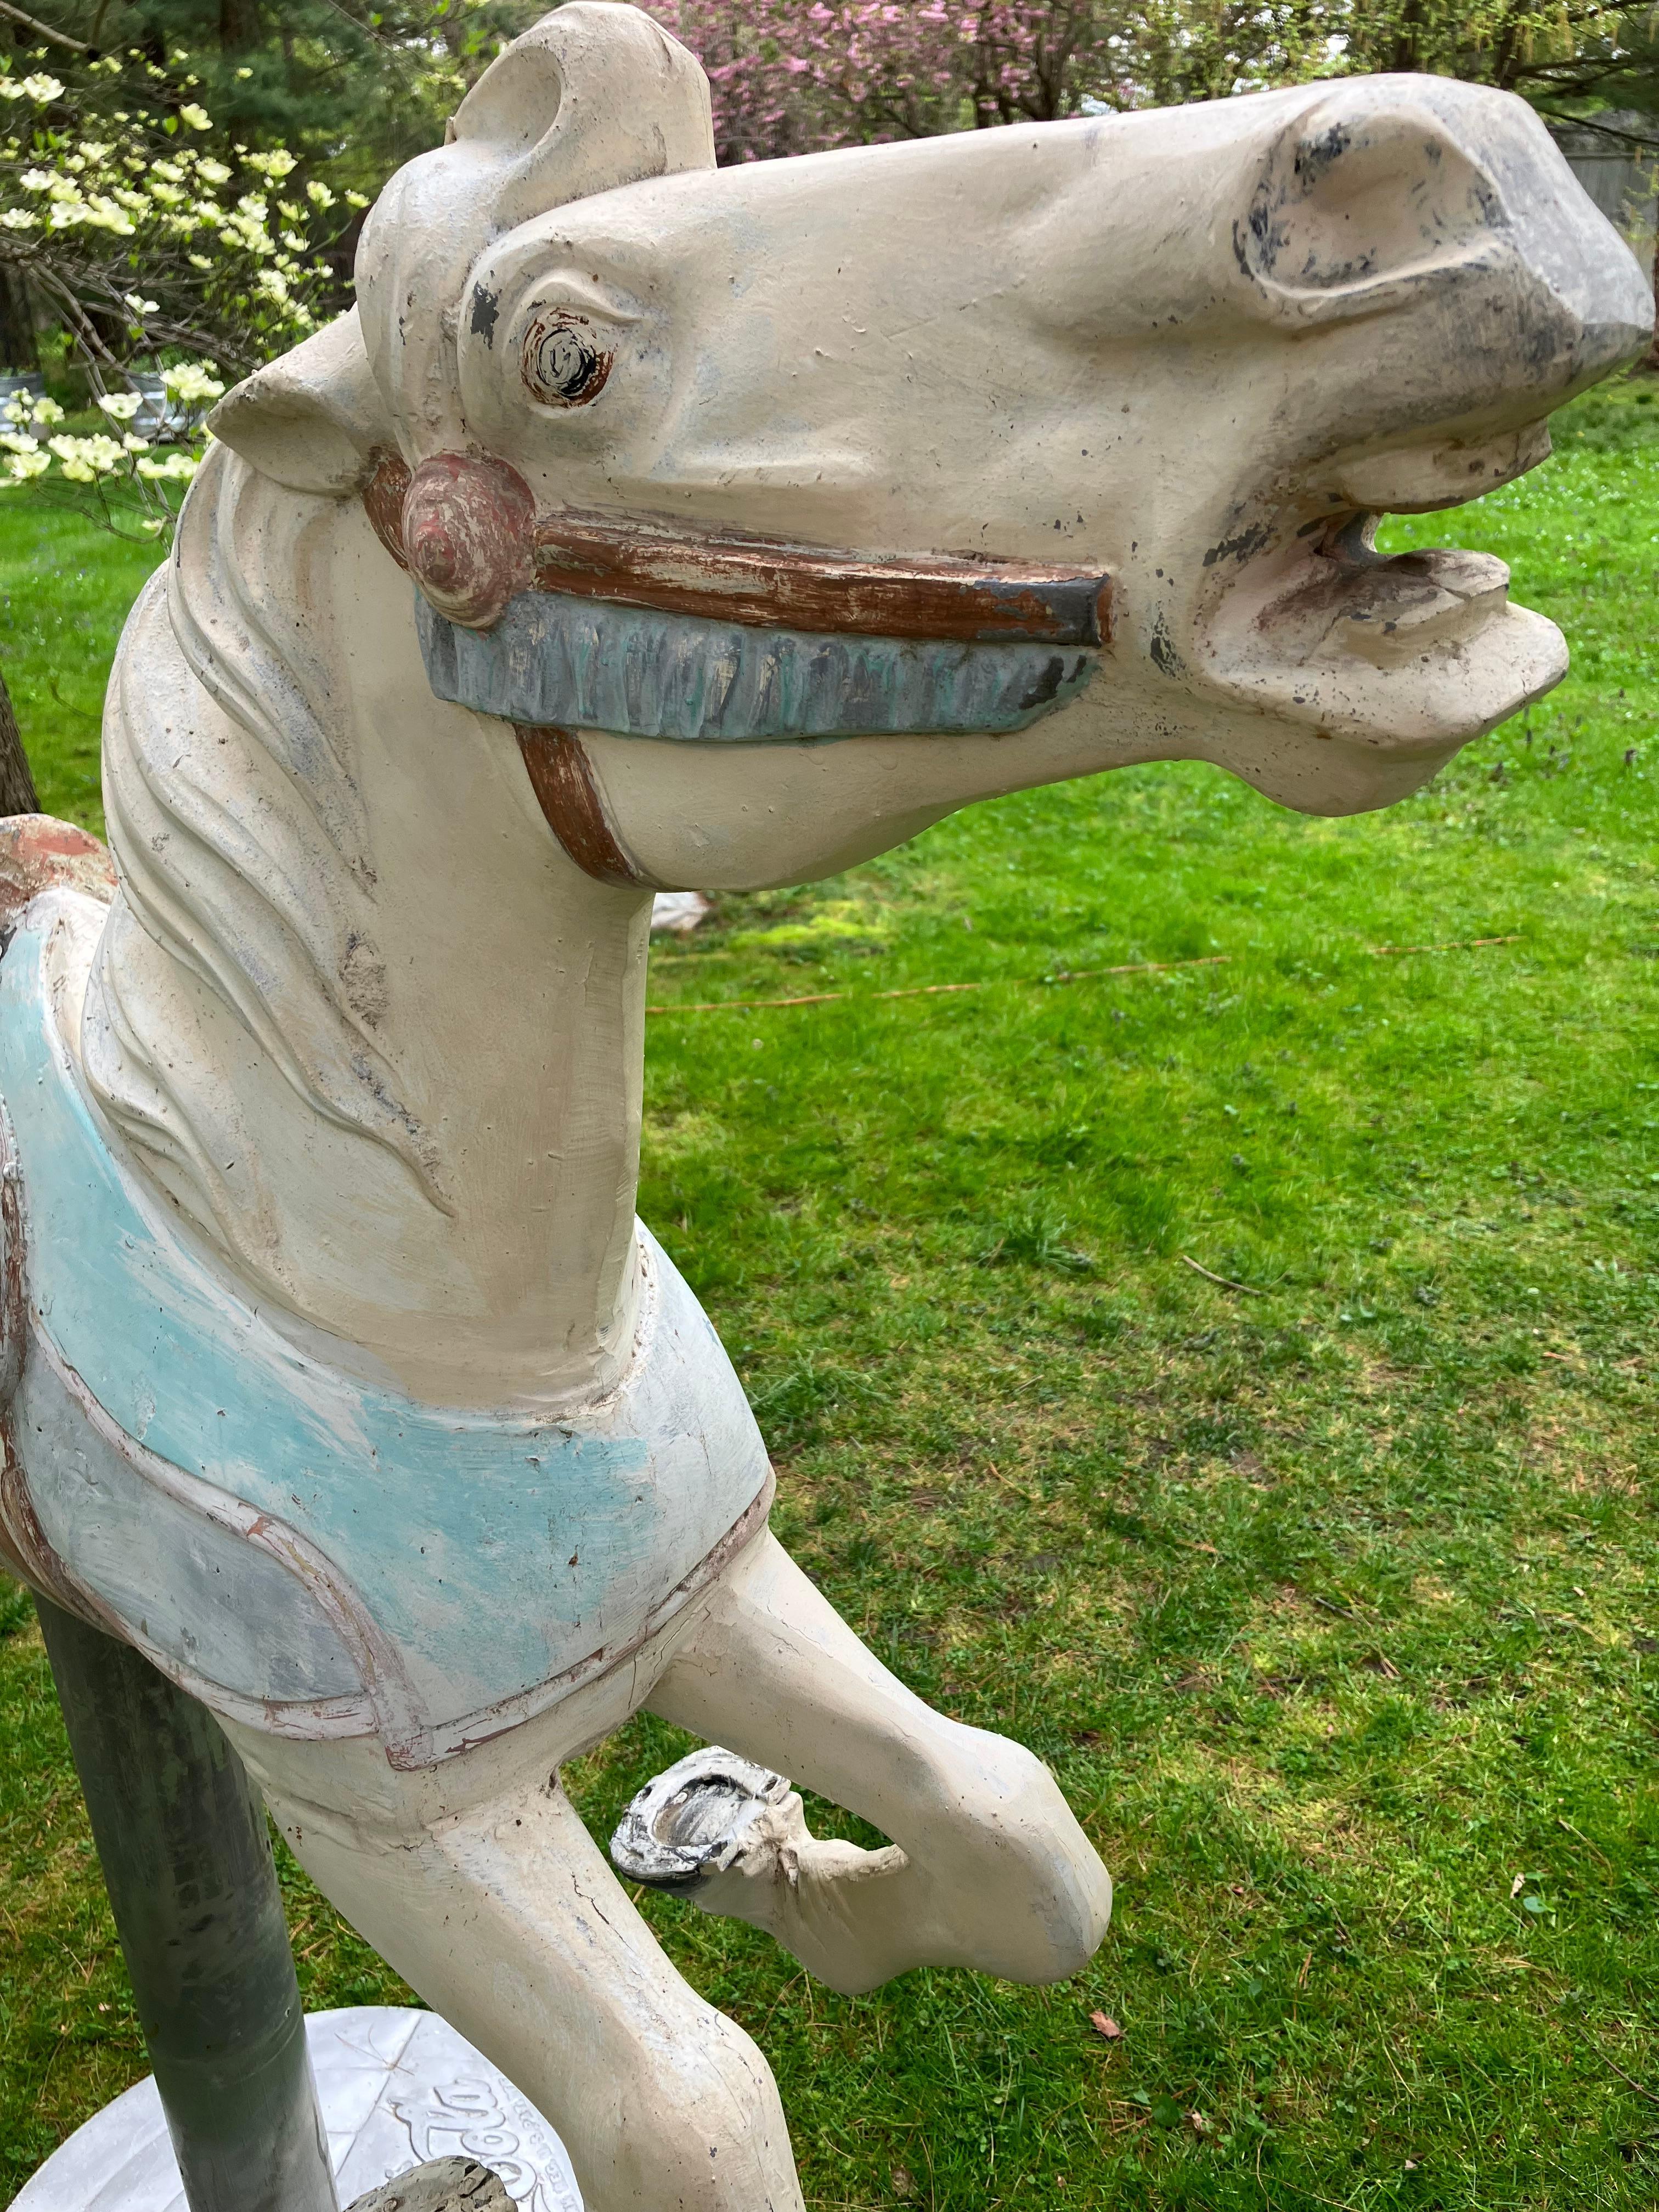 Ca 1950's Coca Cola carousel horse of cast aluminum in vintage paint. Beautiful patina very nice solid condition. This is a rare item. These horses were used like cigar store Indians as come in's for ice cream shops and soda fountains. The horse is